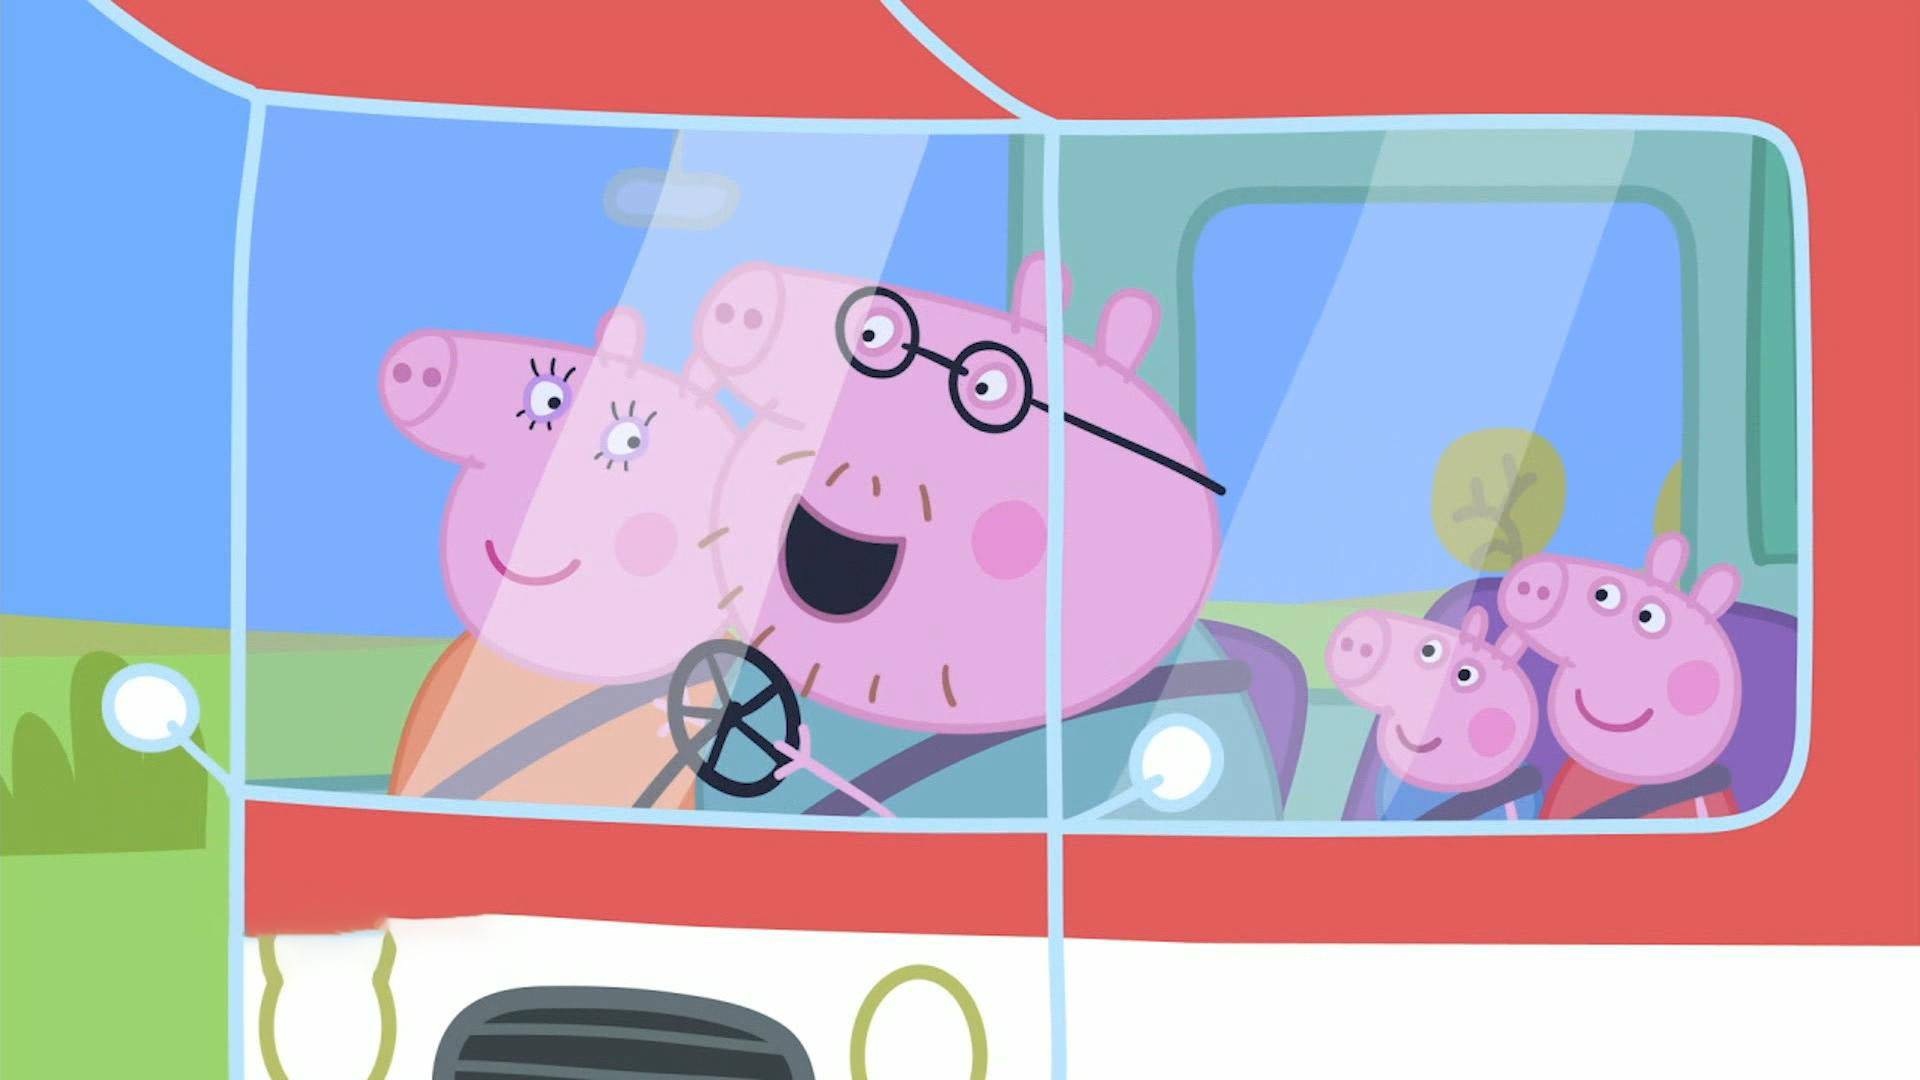 Watch CBS Saturday Morning Inside the life of Peppa Pig Full show on CBS